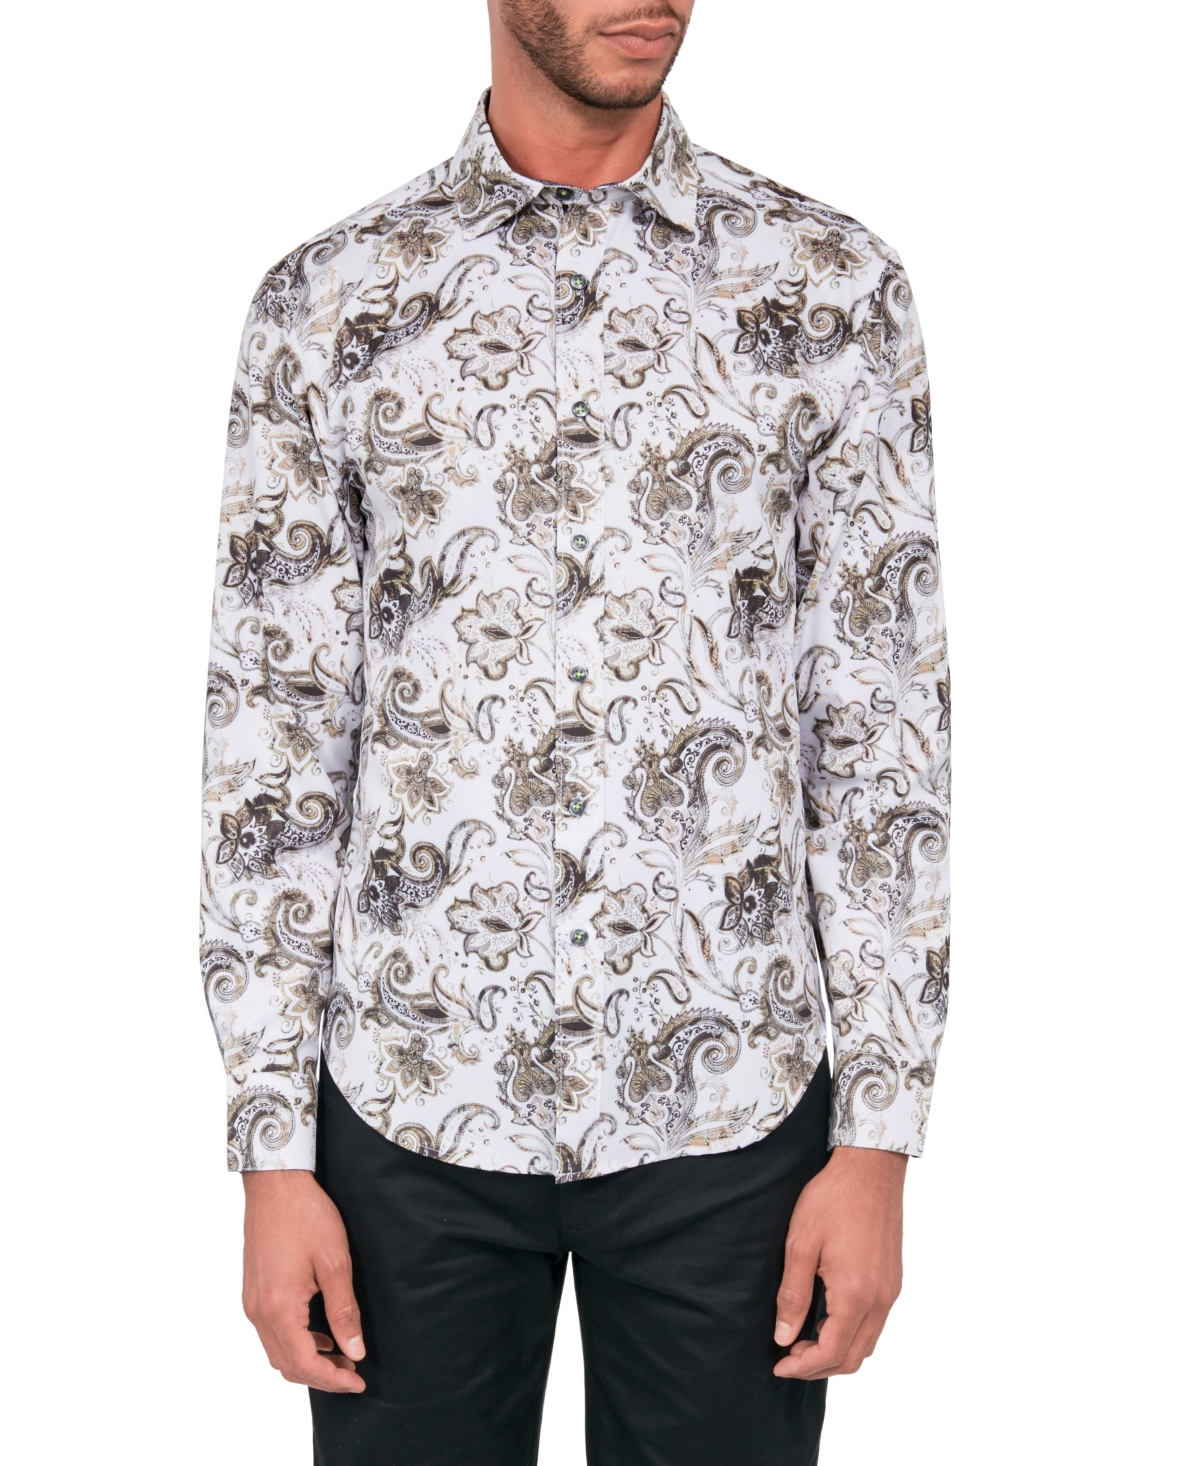 SOCIETY OF THREADS MEN'S REGULAR FIT NON-IRON PERFORMANCE STRETCH PAISLEY BUTTON-DOWN SHIRT